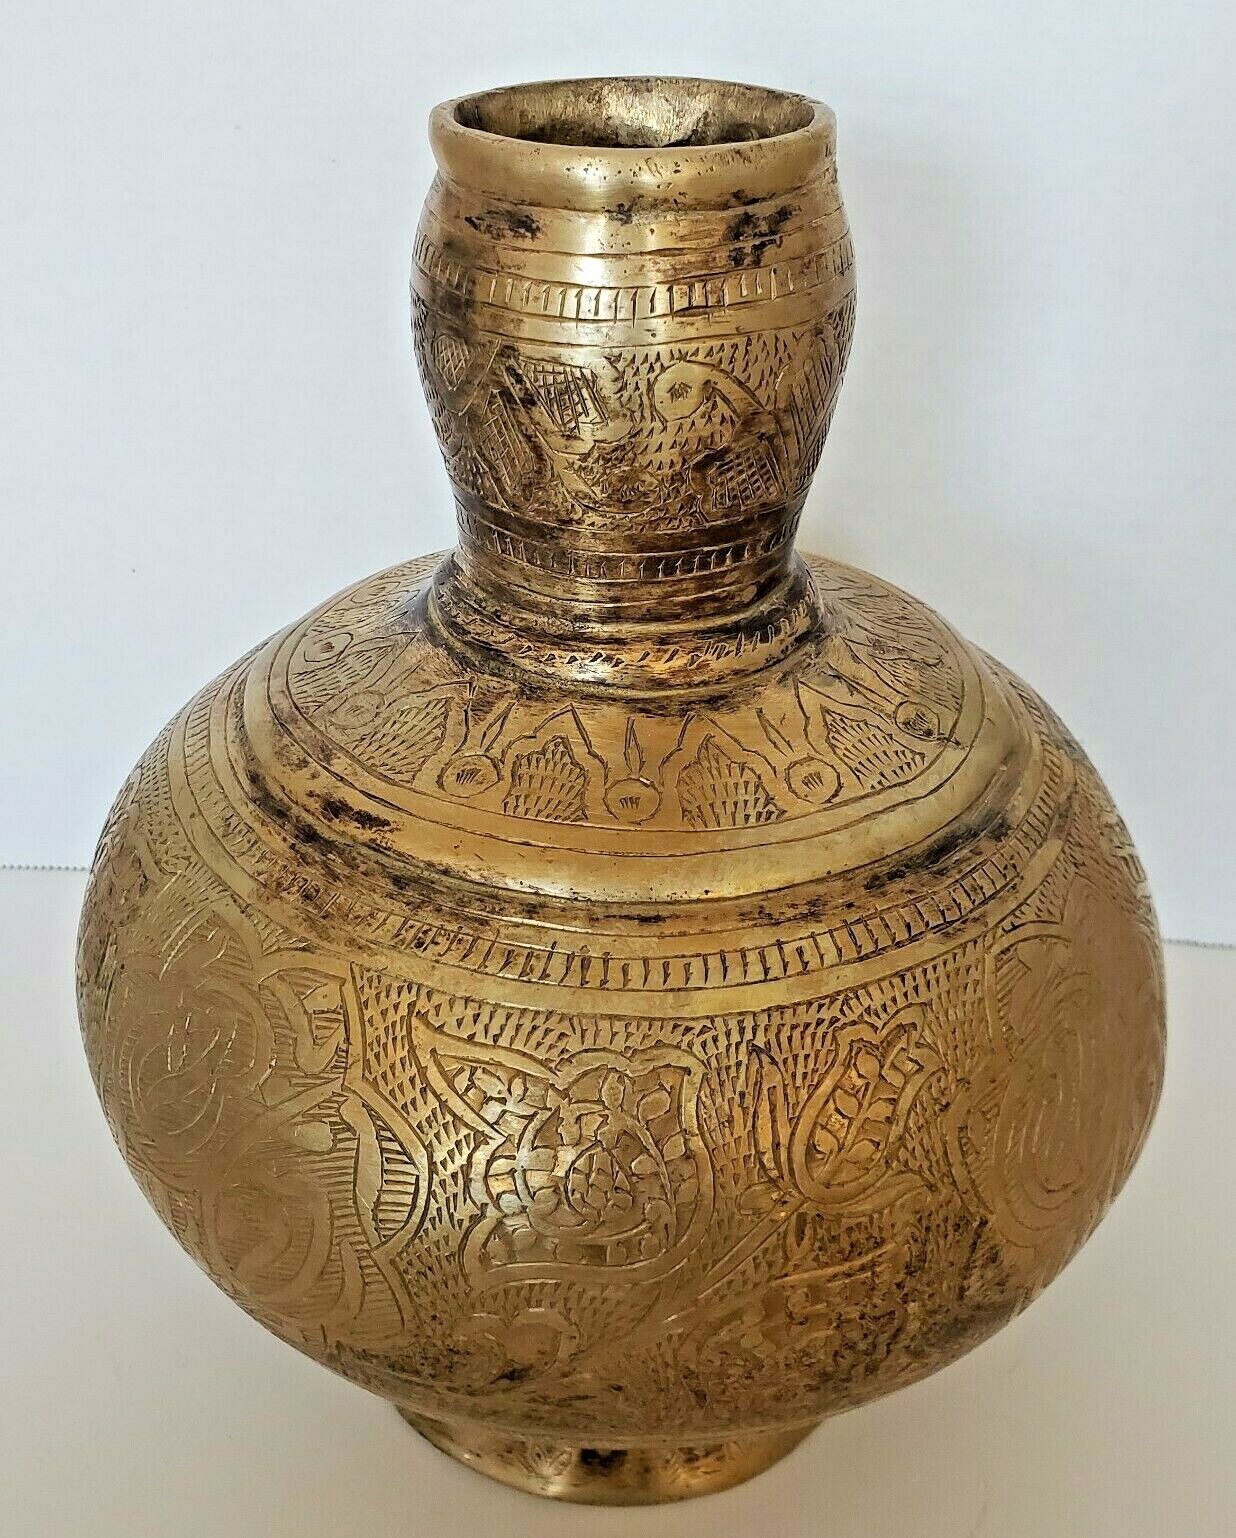 RARE Antique Middle Eastern Engraved Arabic Handcrafted Brass Vessel Islamic Art